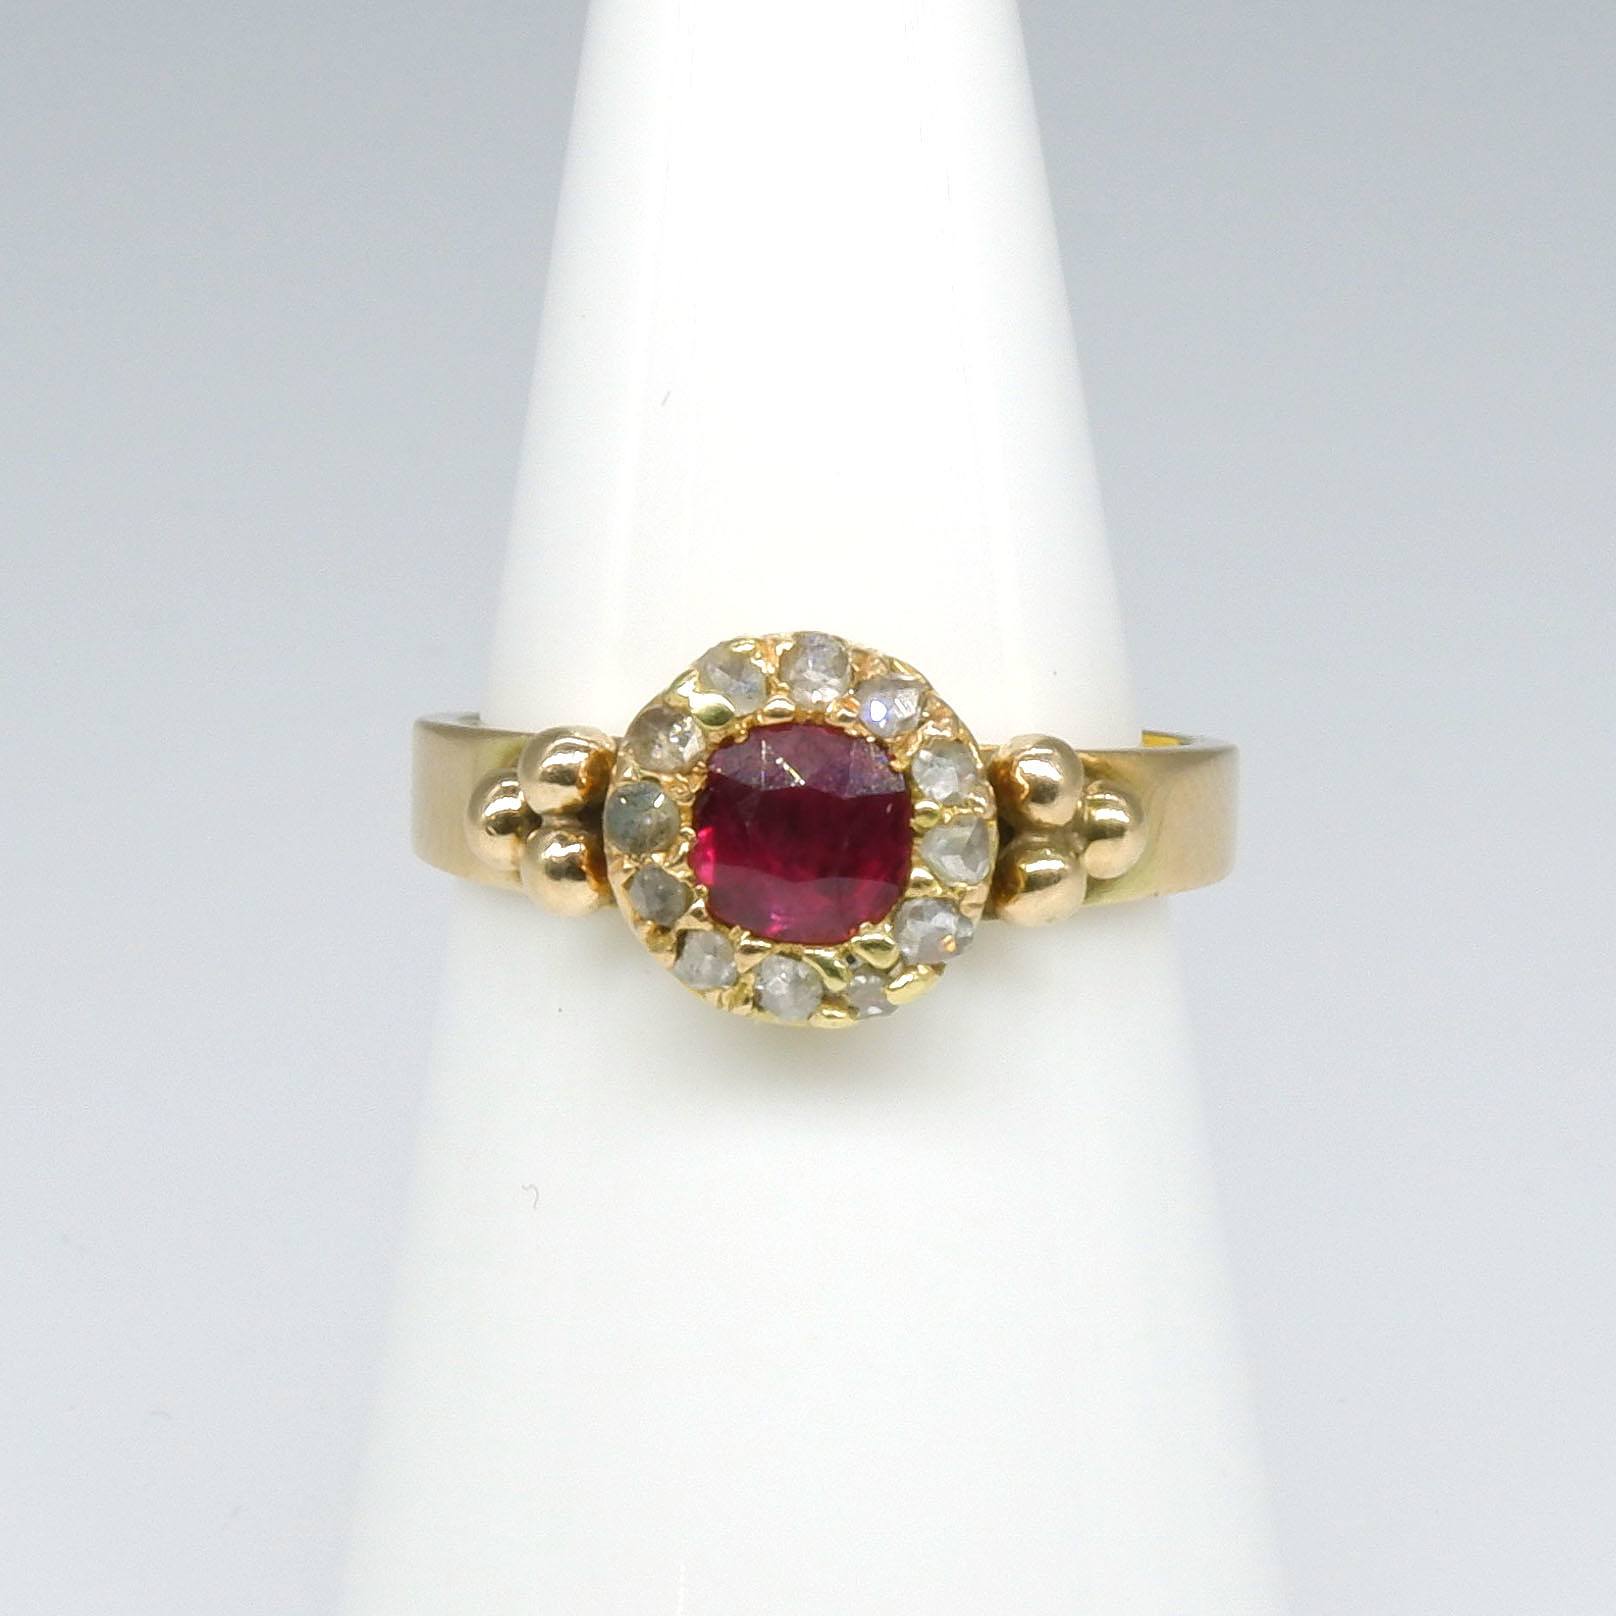 'Antique 9ct Yellow Gold Round Cluster with Cushion Cut Natural Pink/Red Ruby and Twelve Rose Cut Diamonds Ring'